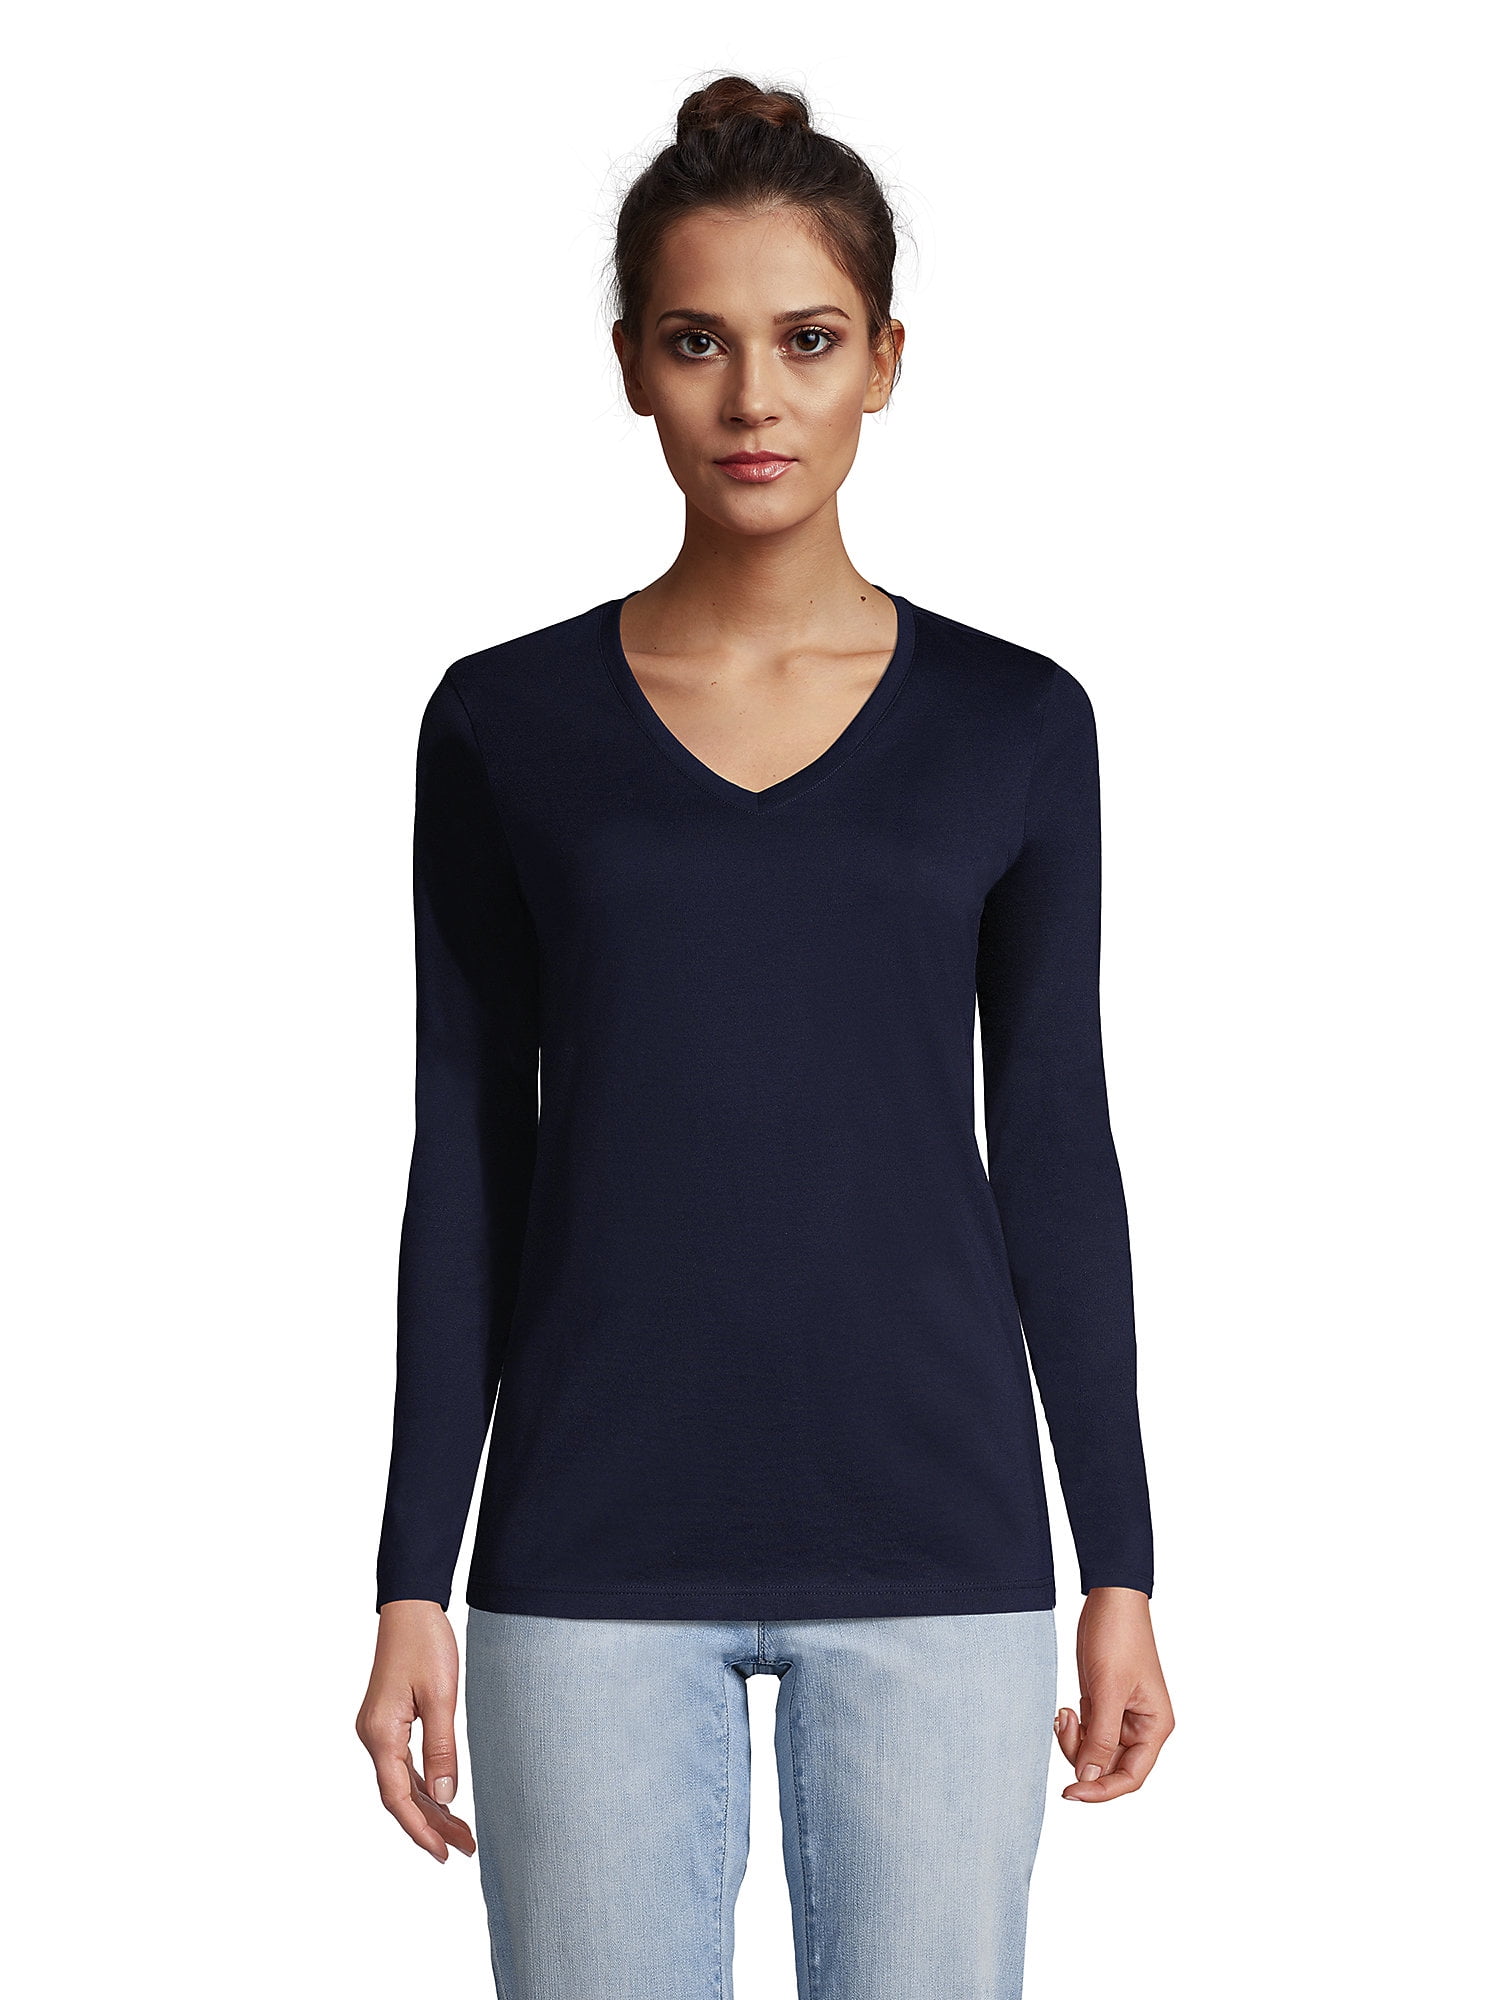 Lands' End Women's Relaxed Supima Cotton Long Sleeve V-Neck T-Shirt